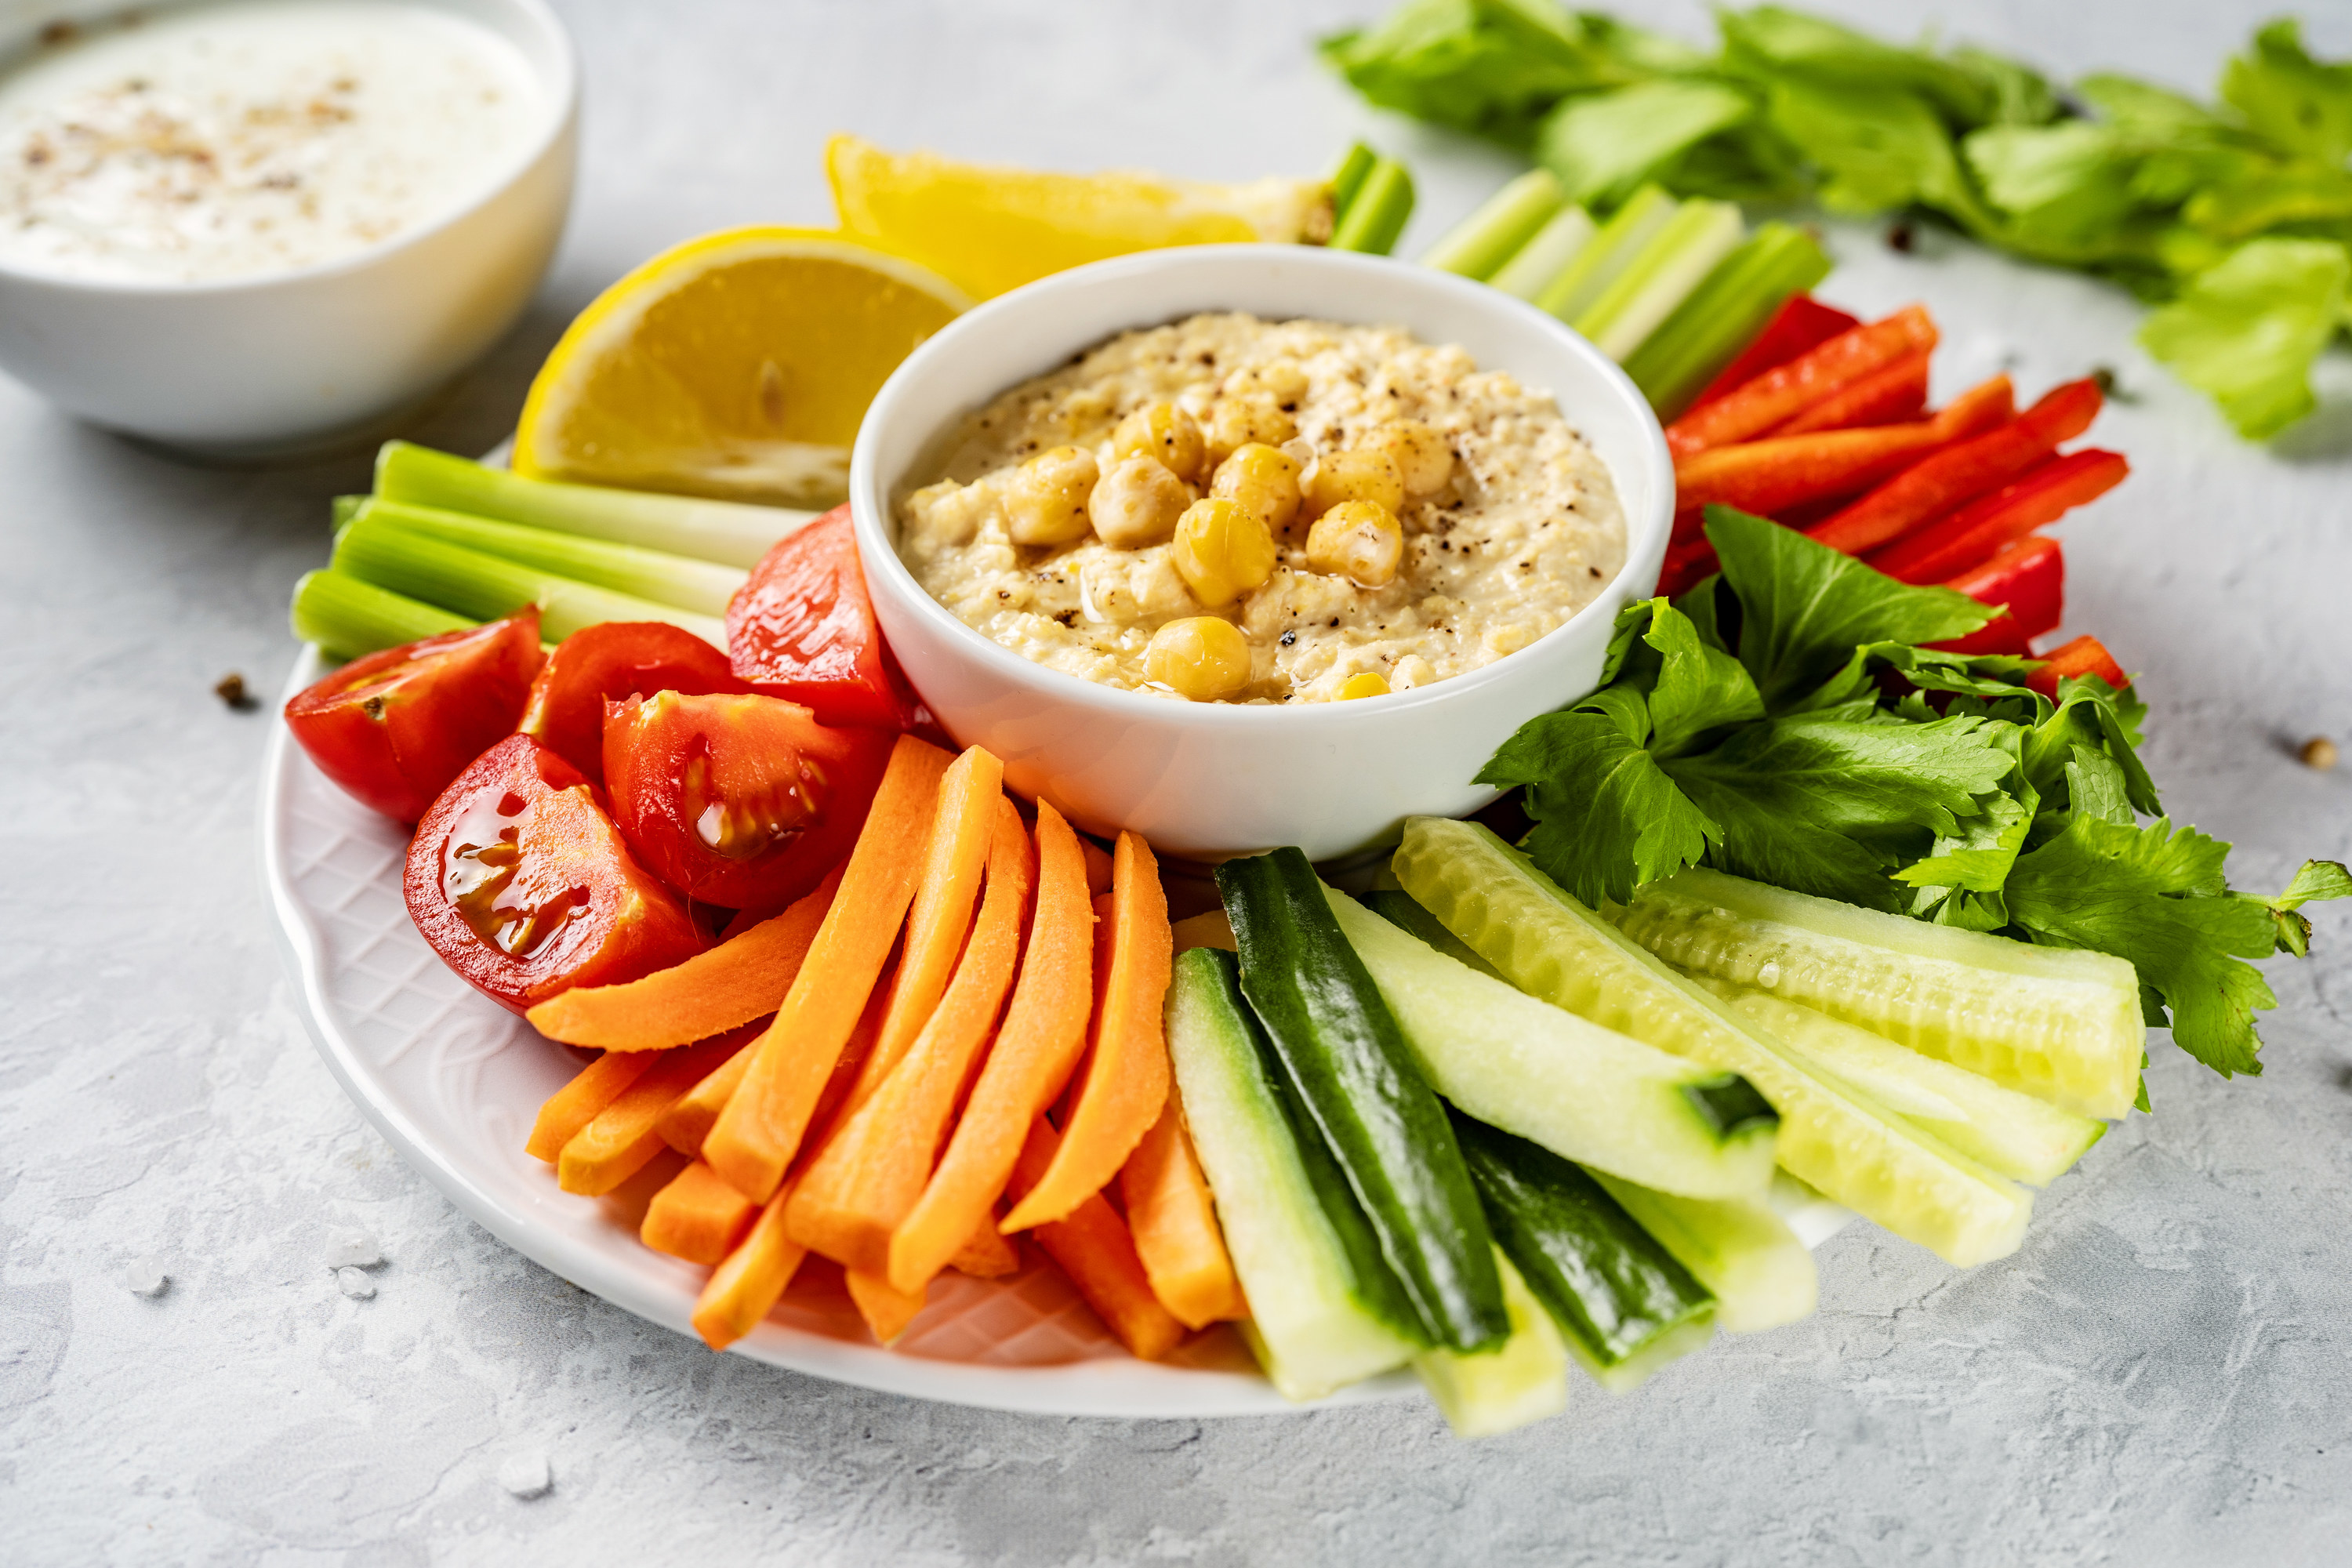 A plate of veggies and dip